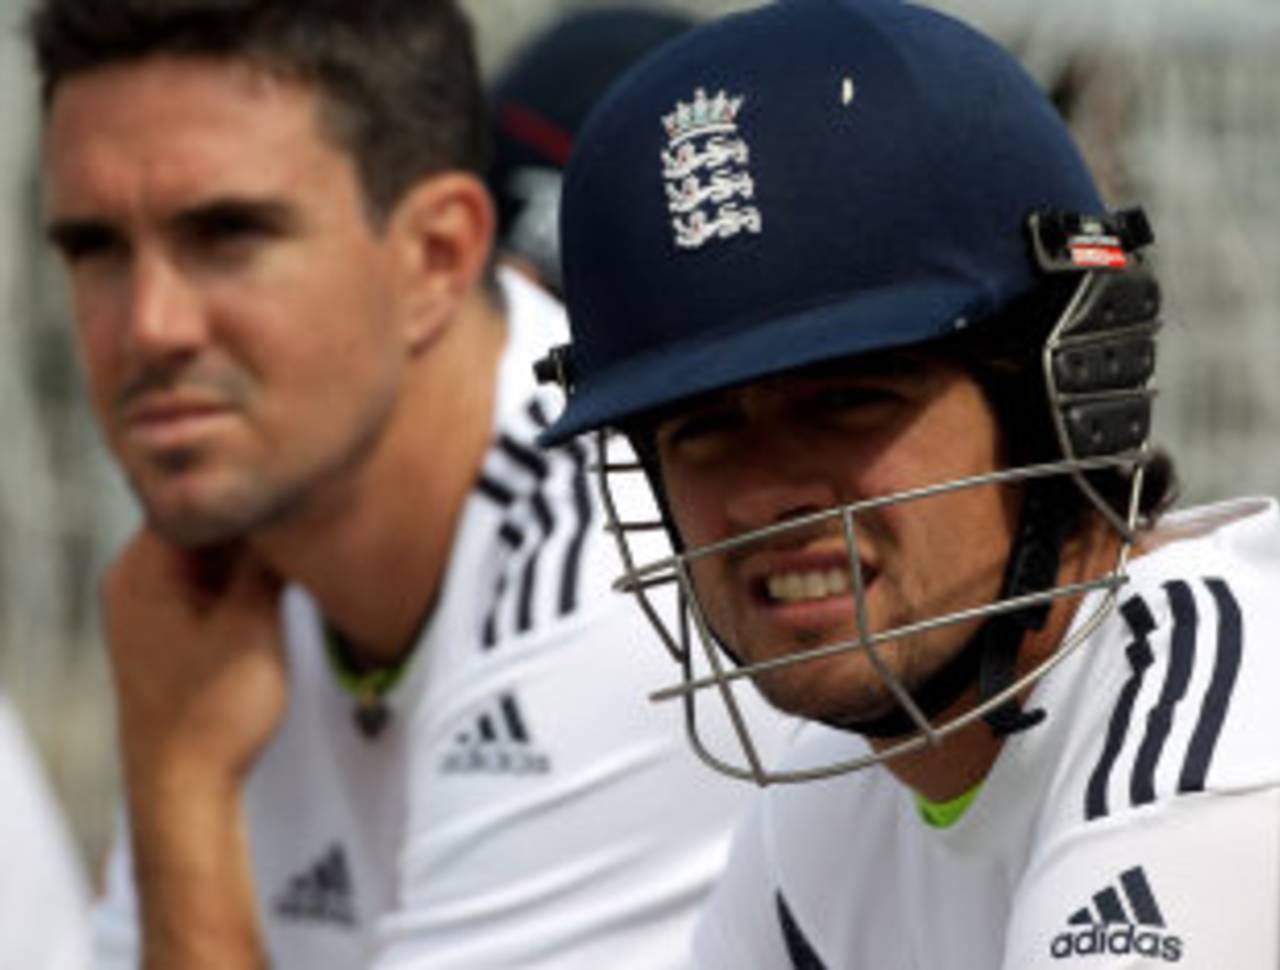 Kevin Pietersen and Alastair Cook contemplate the forthcoming second Test against Bangladesh, England v Bangladesh, 2nd Test, Old Trafford, June 2, 2010